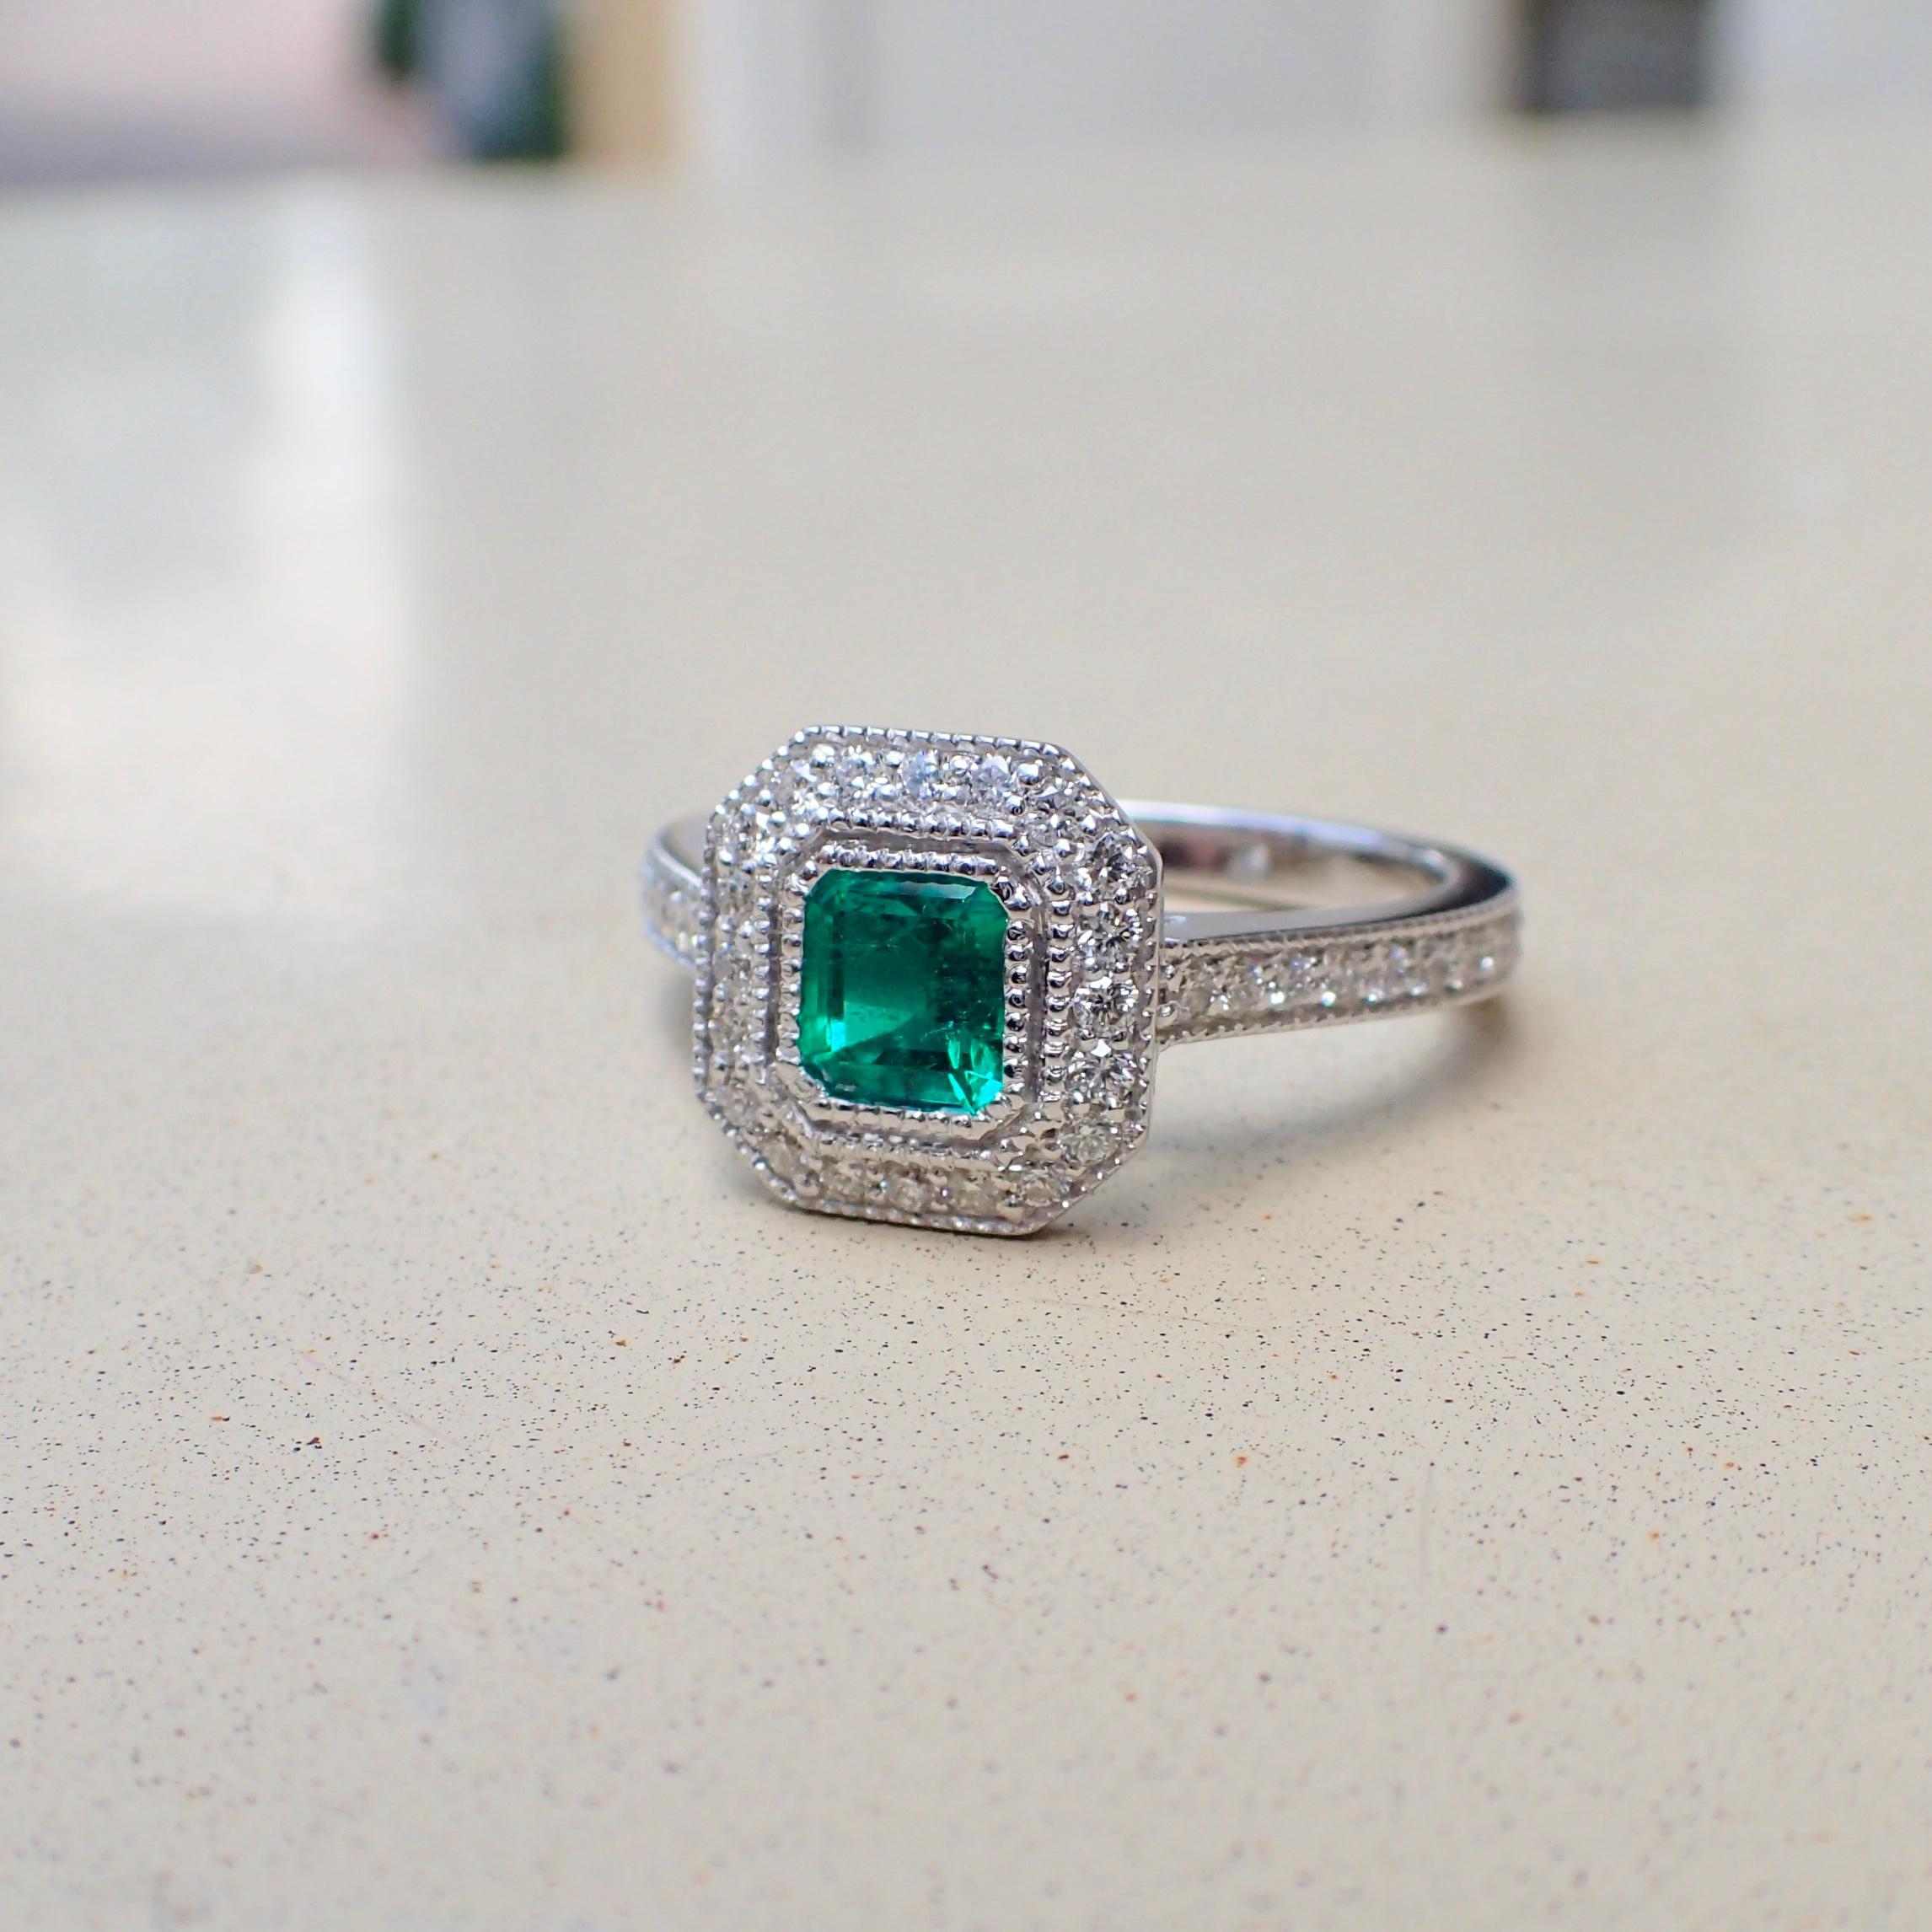 Contemporary 18 Karat White Gold Ring with a 0.518 Carat Emerald and 0.37 Carat of Diamond